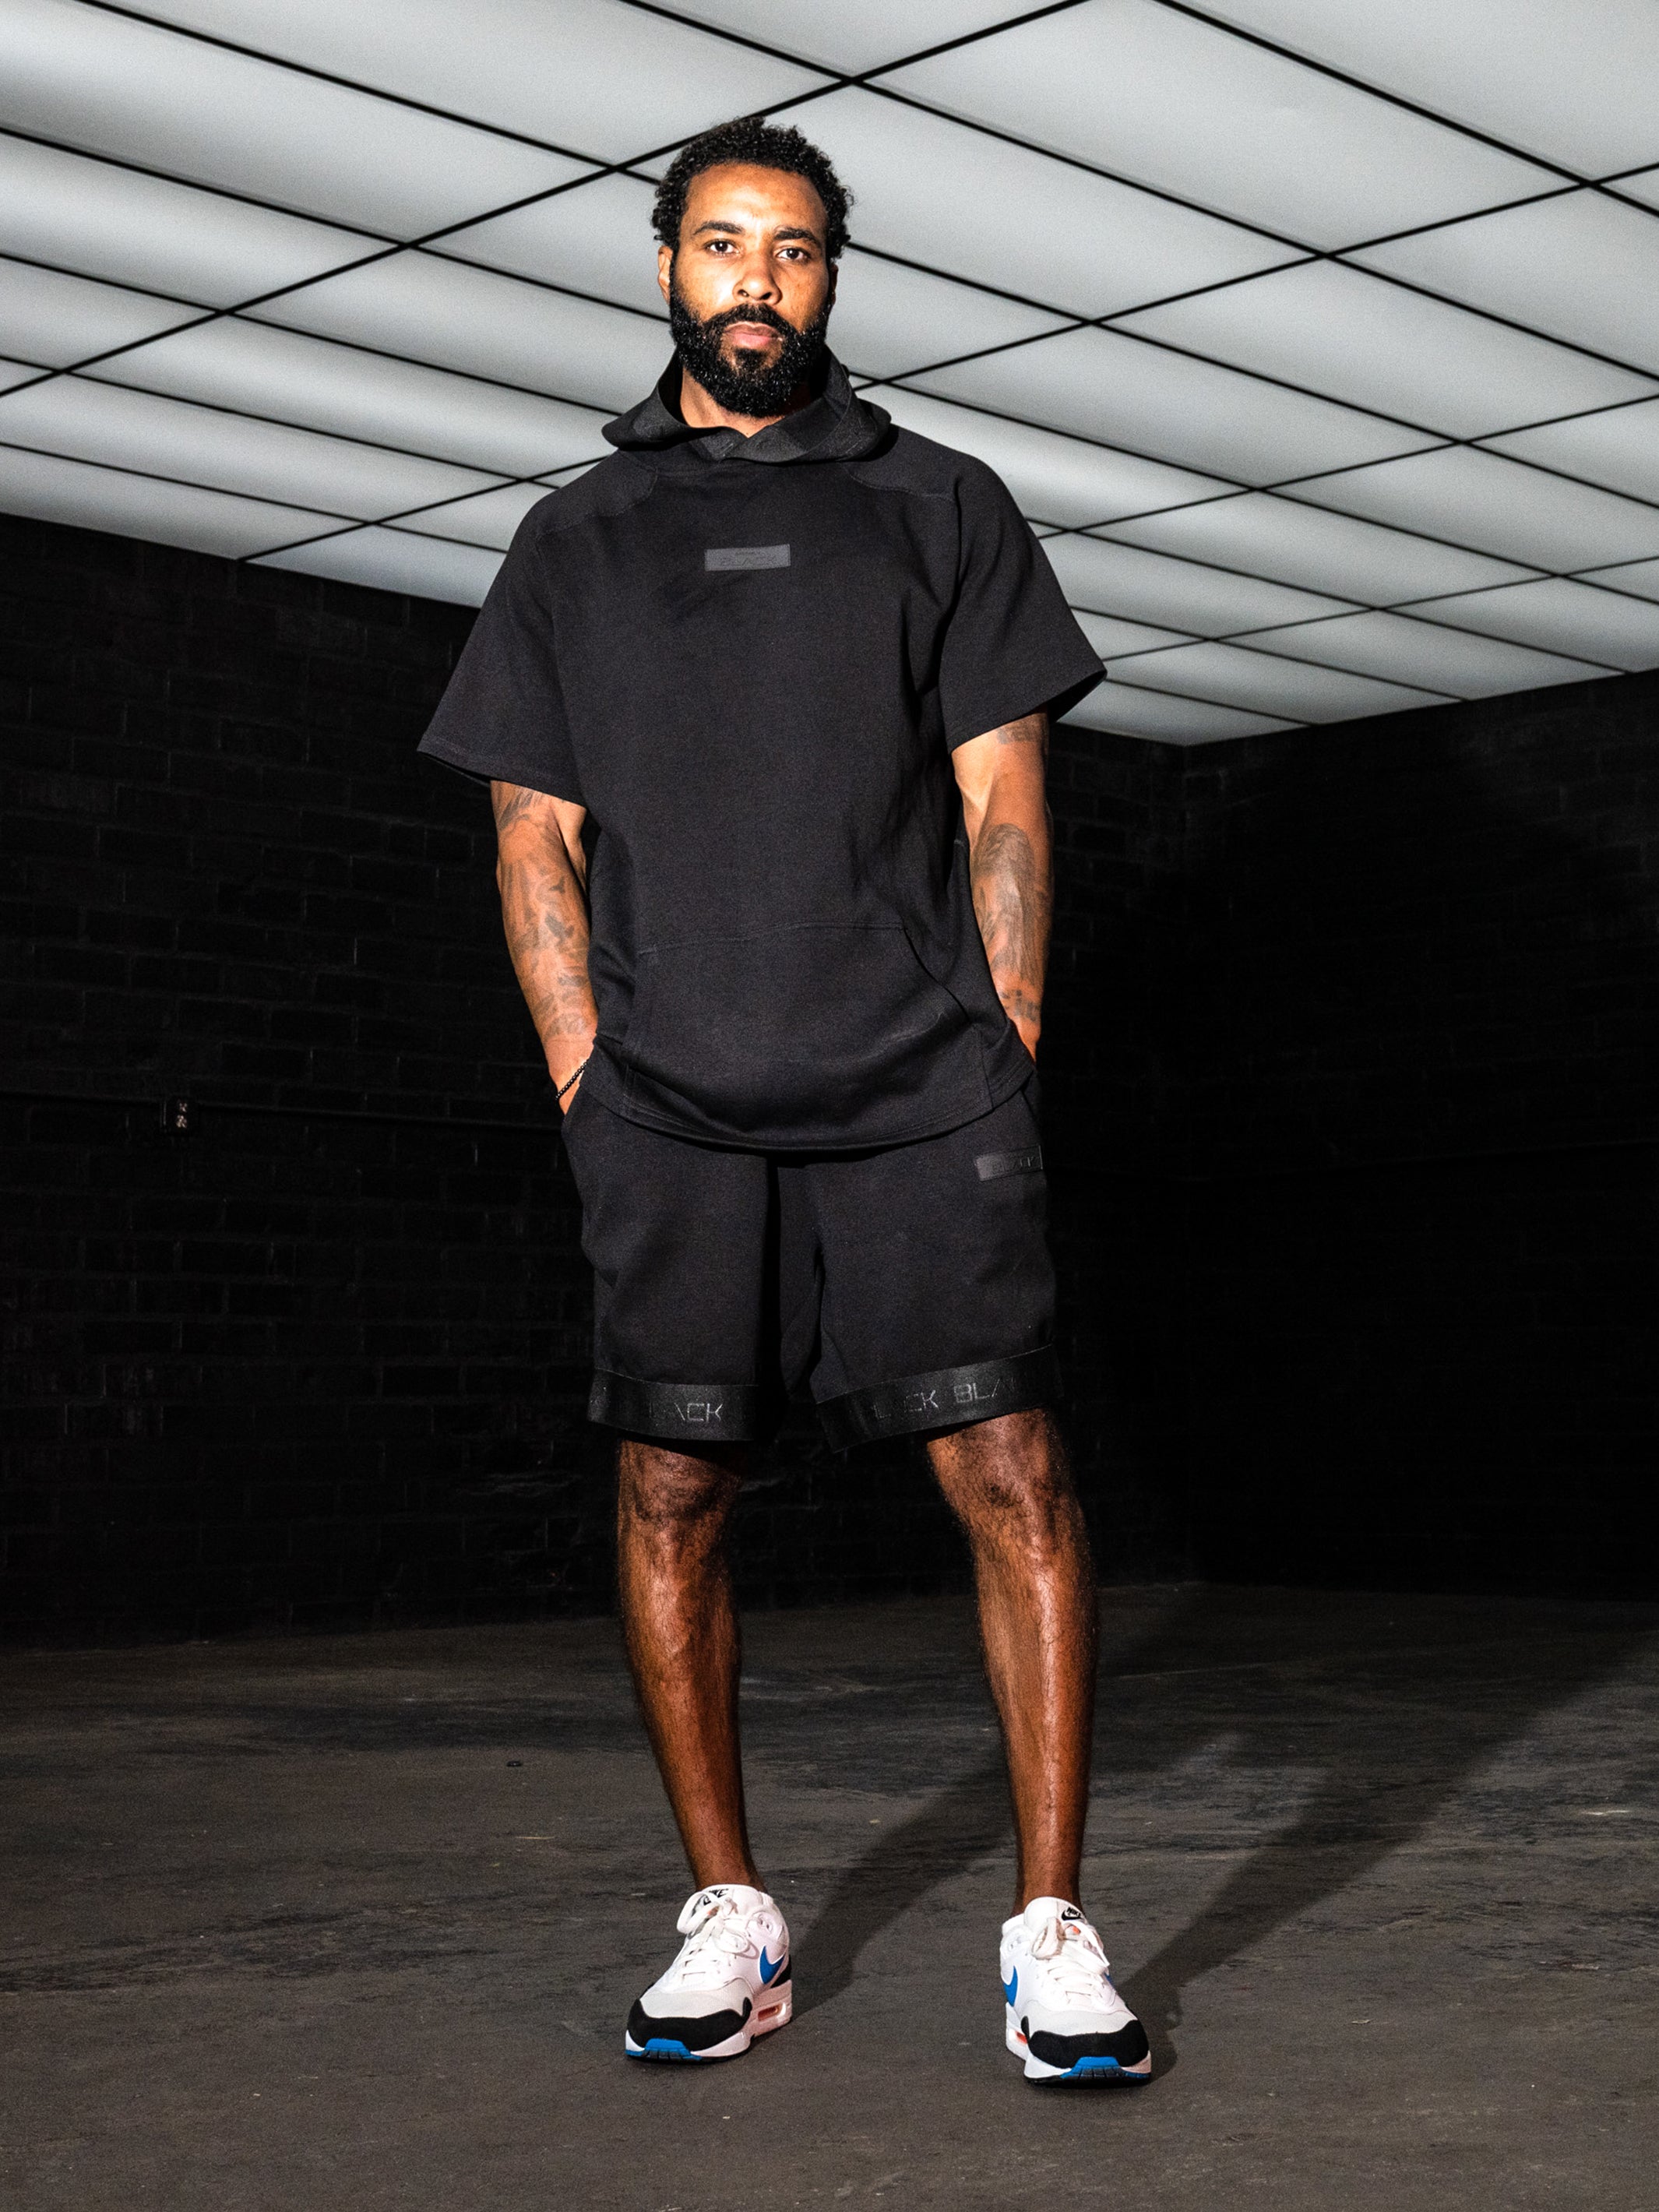 Men's Black Band Luxe Shorts